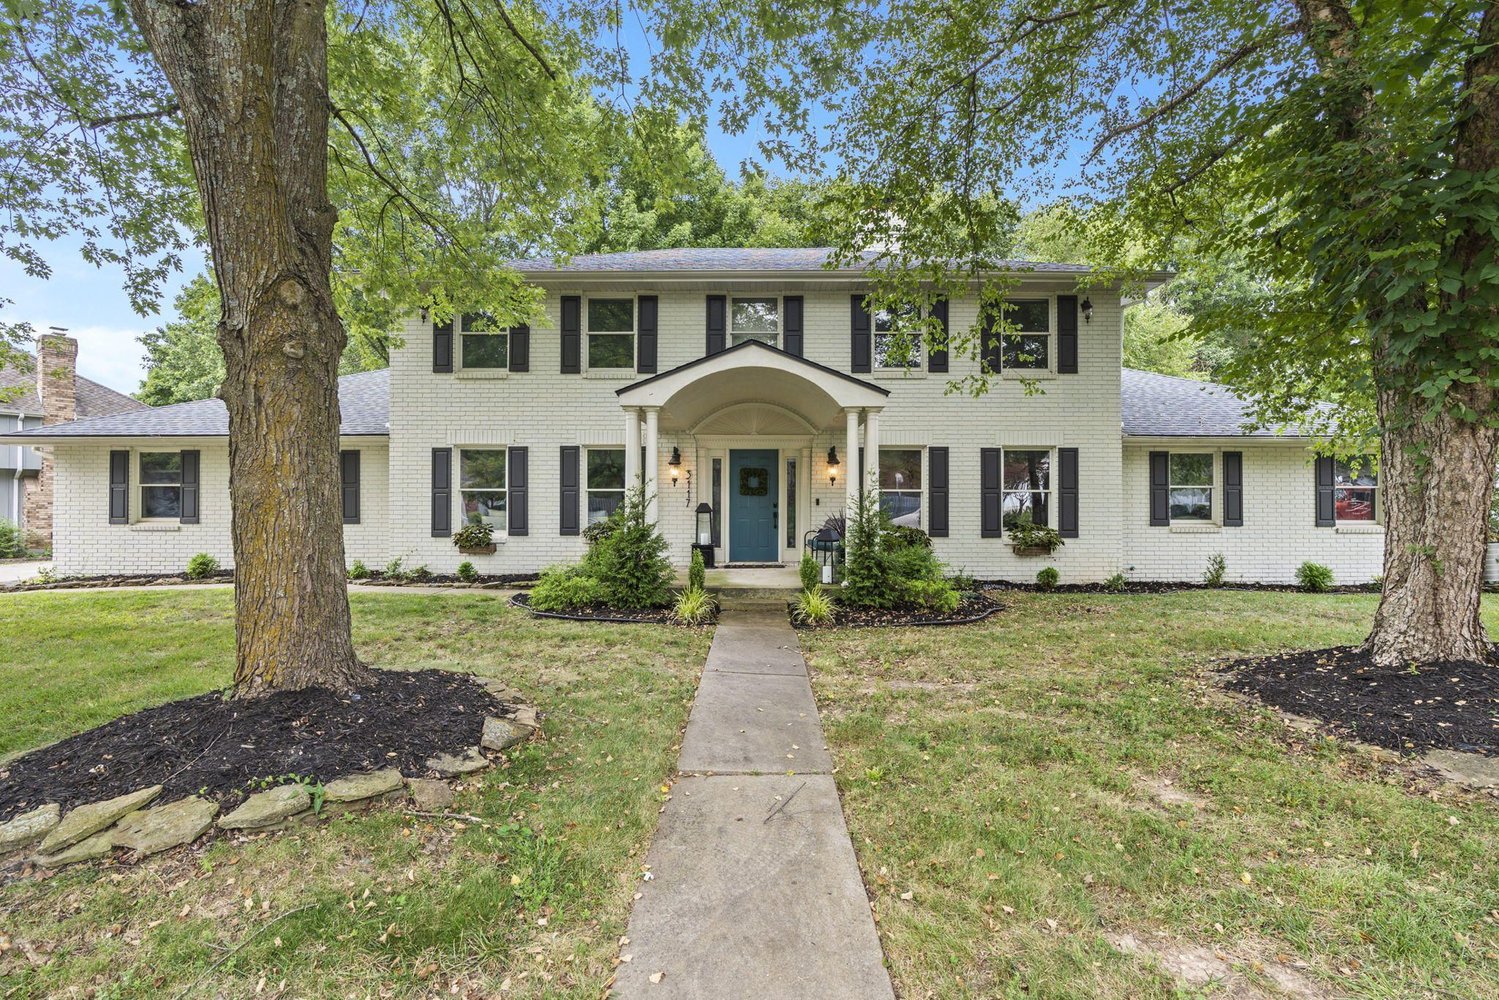 3117 S. Chamberry Ave.
$559,900
Bedrooms: 6
Bathrooms: 5
Listing firm: Keller Williams Greater Springfield